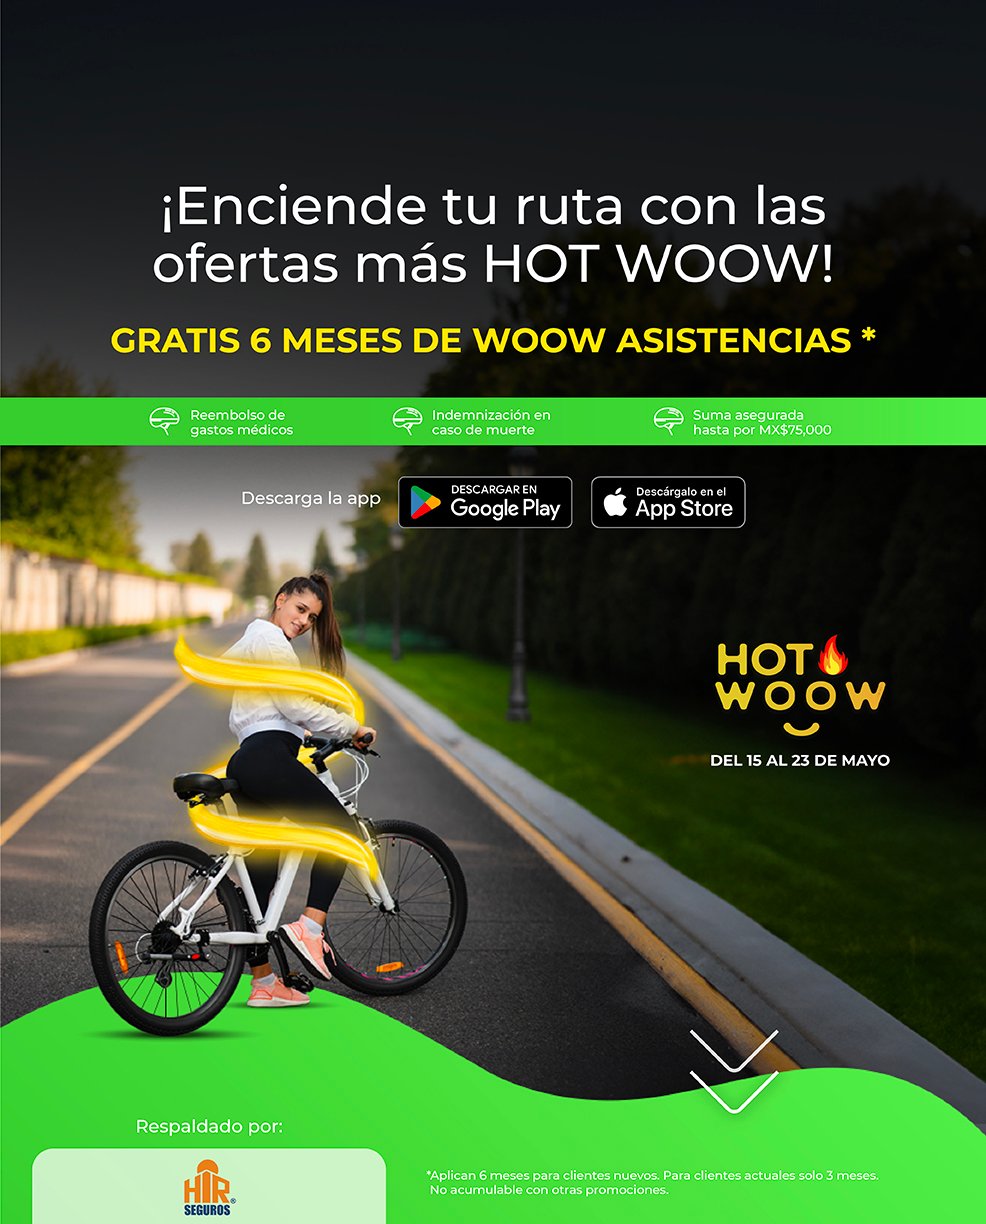 woow-hotwoow_24-hero-mobile-11_bici_clupp